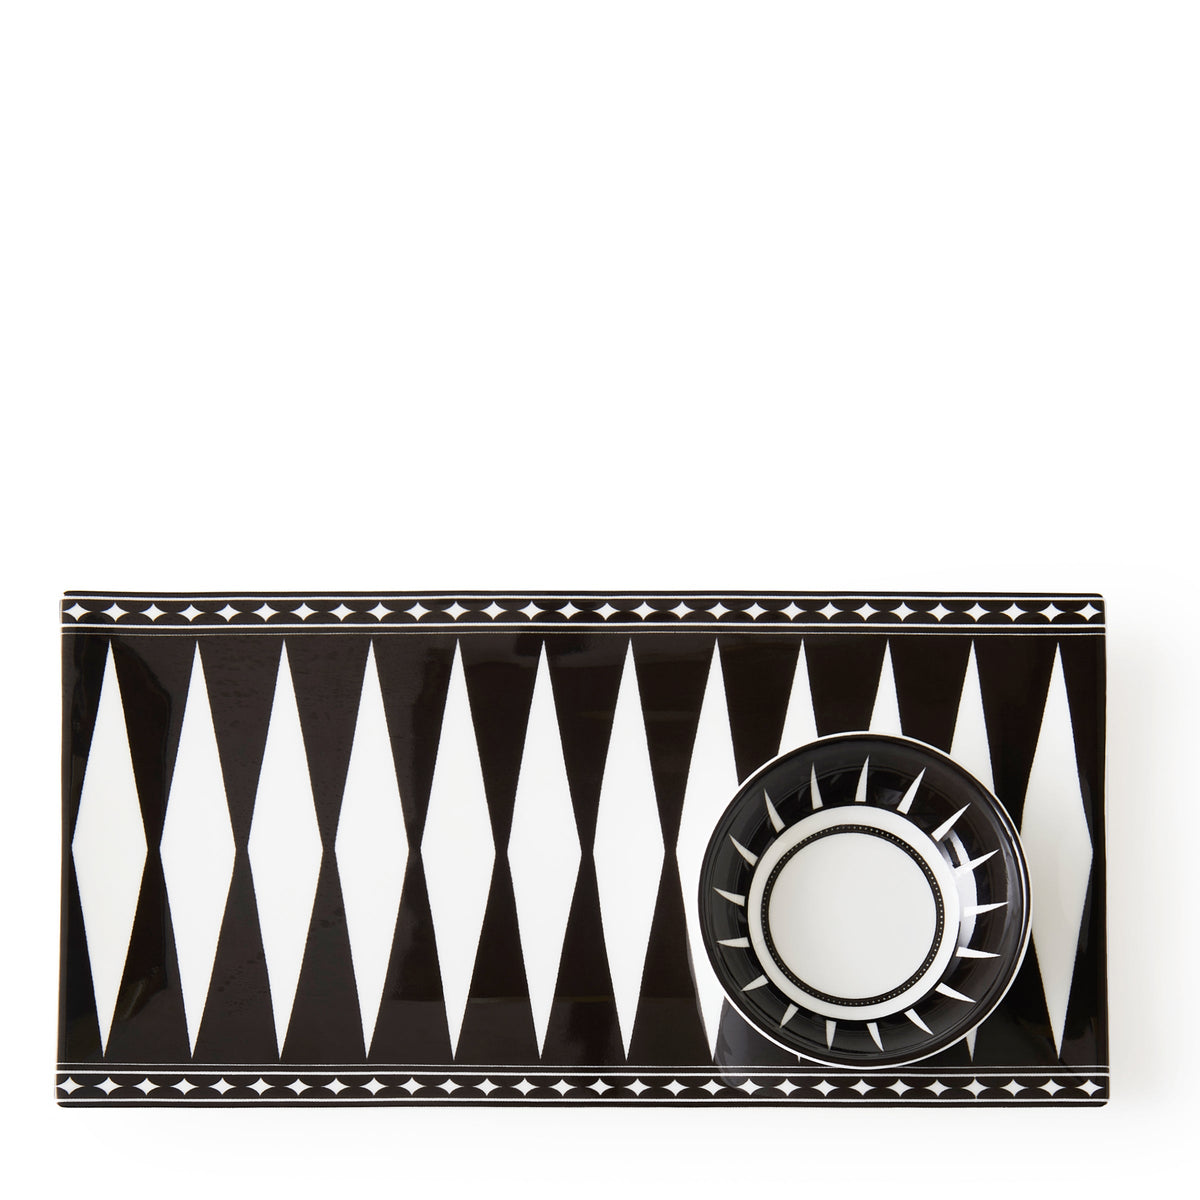 A black and white geometric patterned rectangular bone china tray with a matching small bowl placed on it, both featuring diamond and triangular designs, perfect for serving appetizers, this is the Marrakech Large Sushi Tray by Caskata.